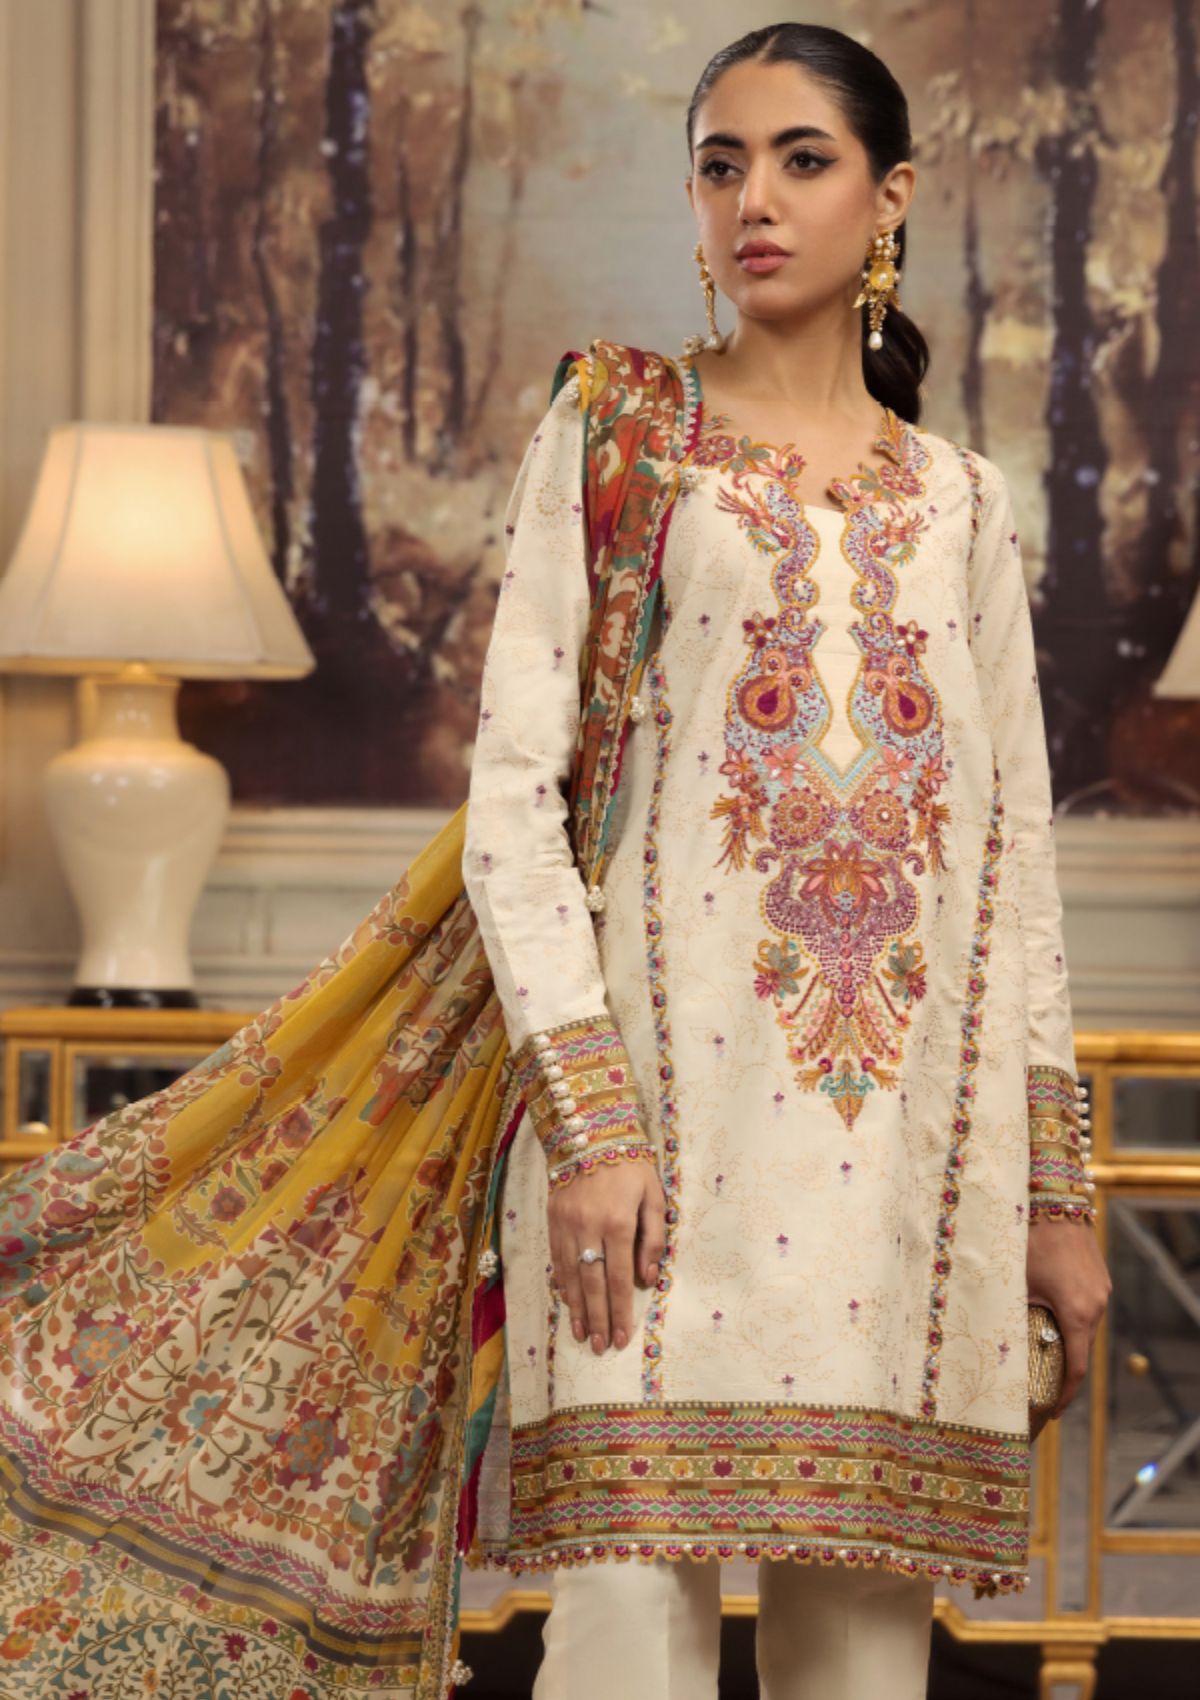 Buy ANAYA latest collection at Mohsin Saeed Fabrics. high quality and trendy designs Check Price and Shop Online. ✓ Free Shipping ✓ Cash on Delivery ✓ Best women clothing Store in Pakistan